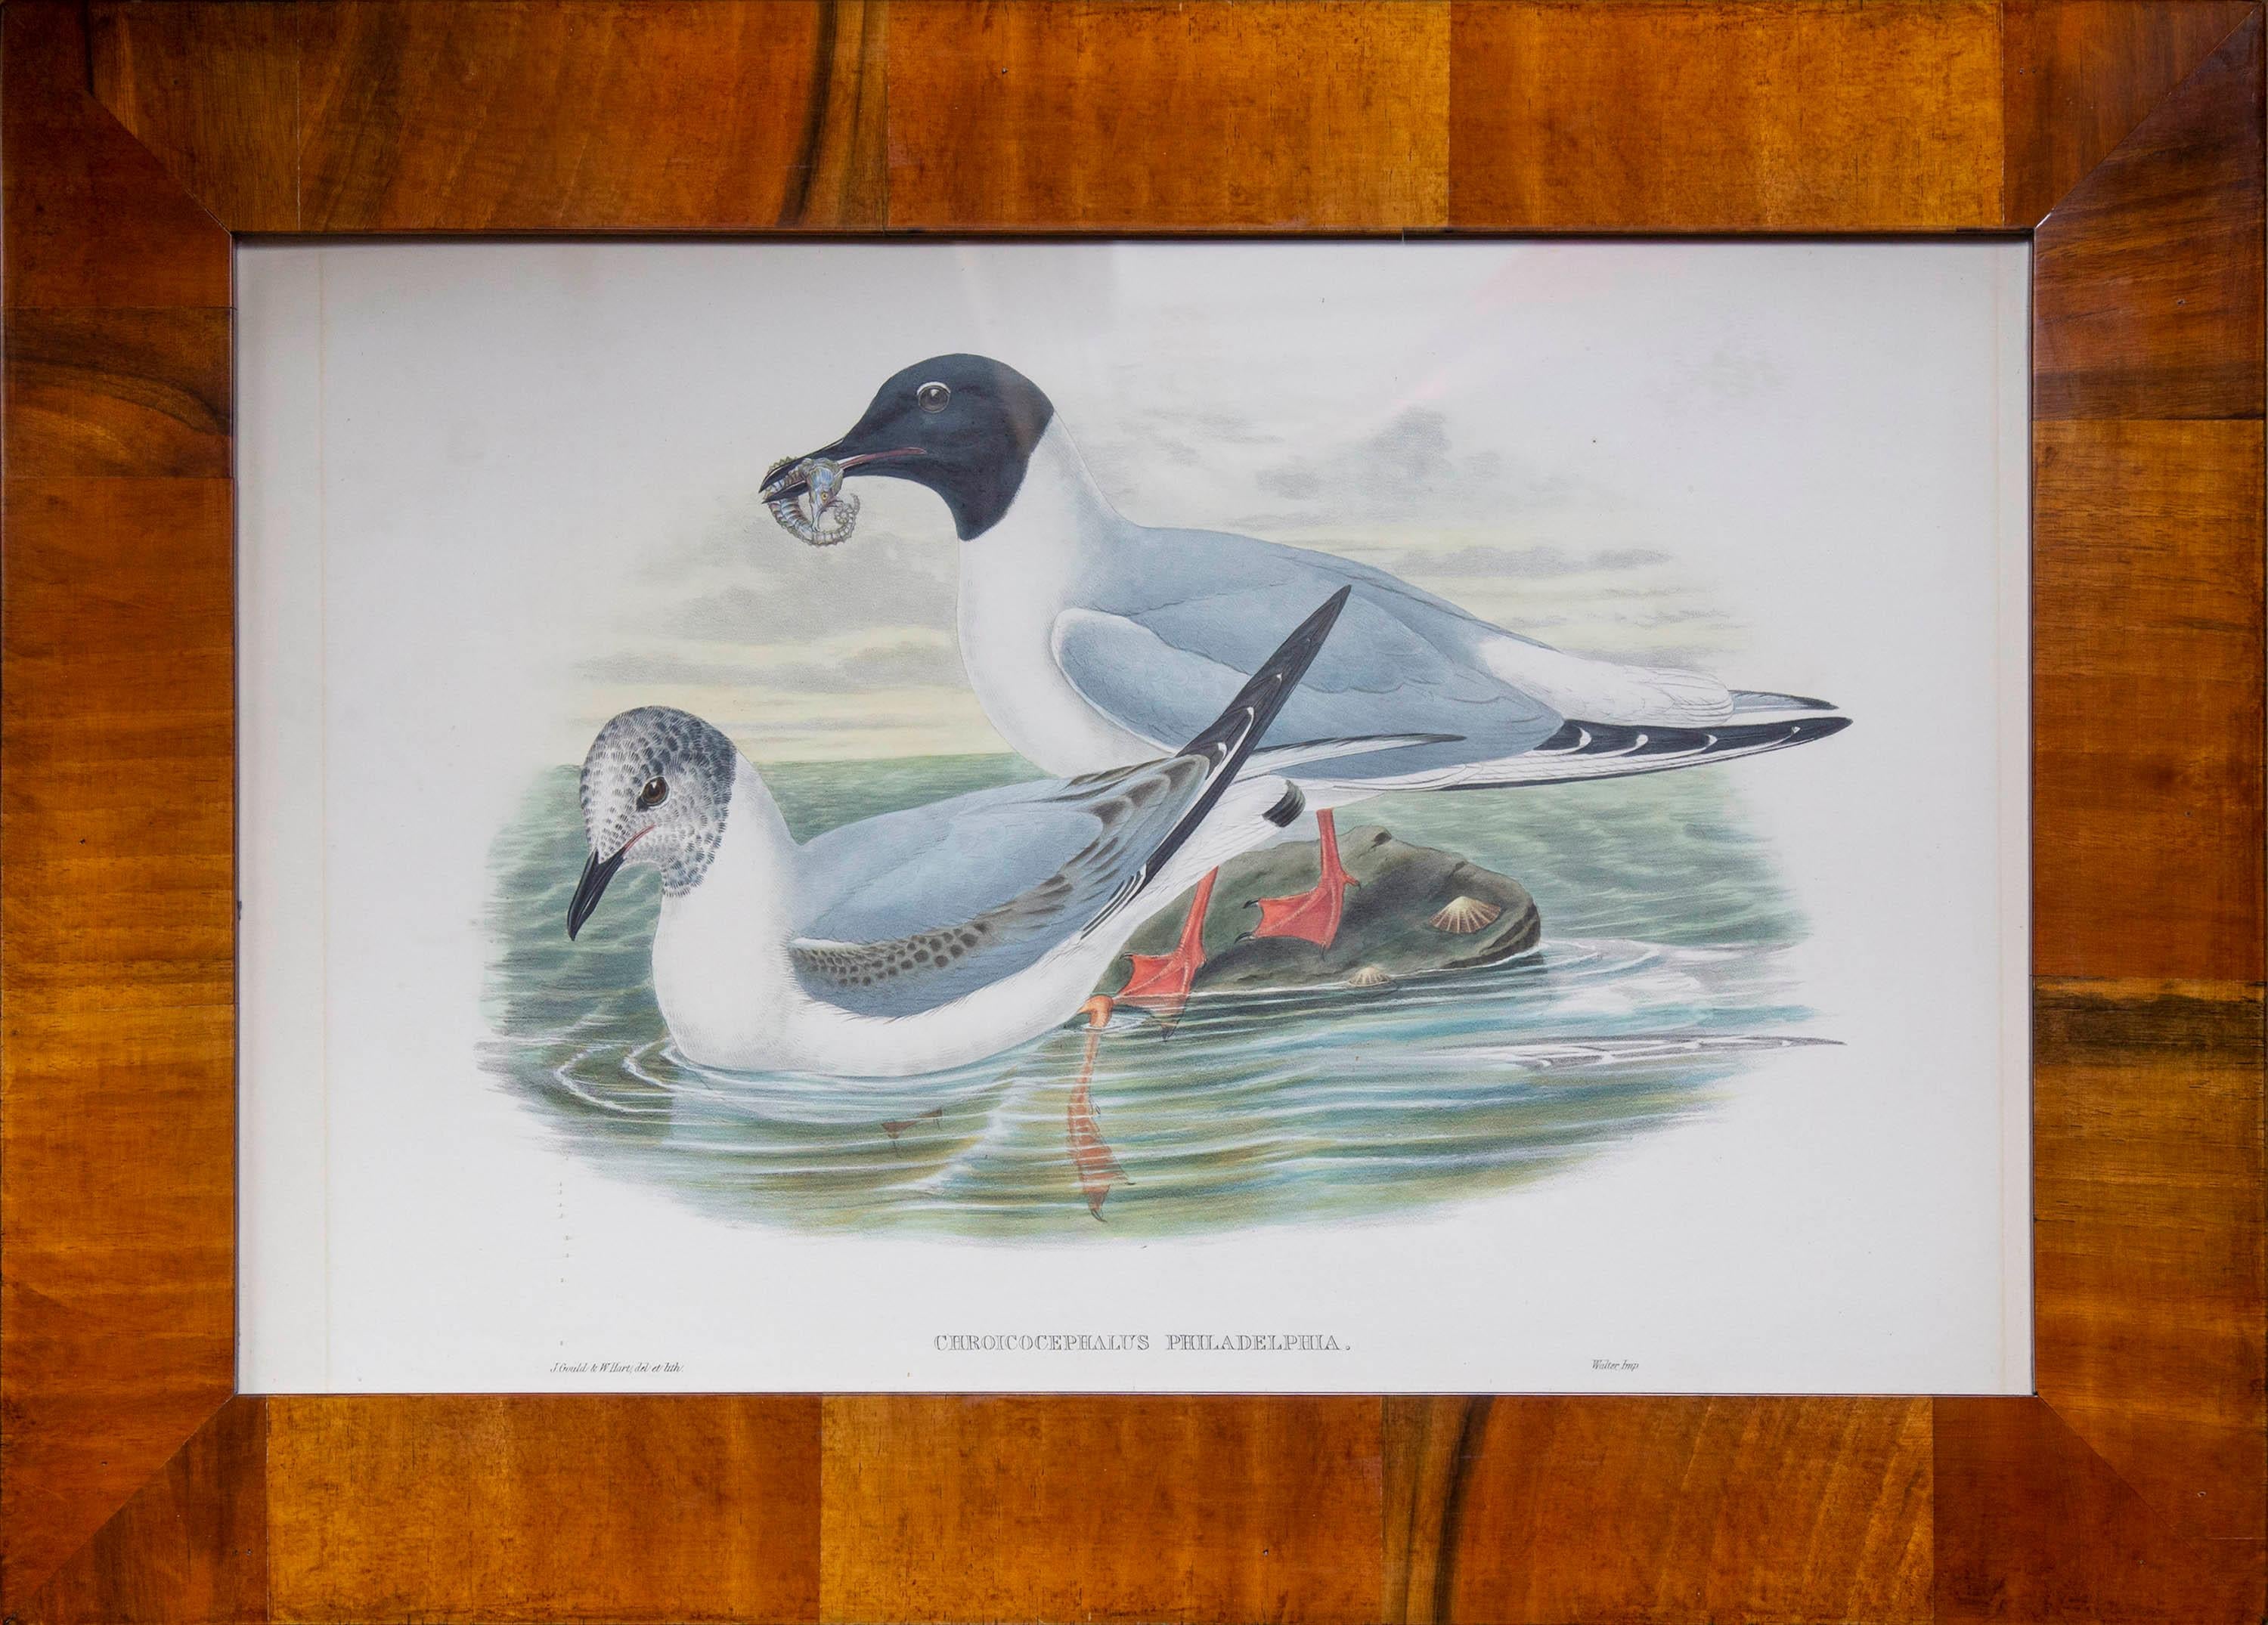 Set of 8 Antique Seagull Prints by John Gould, from The Birds of Great Britain In Good Condition For Sale In Richmond, London